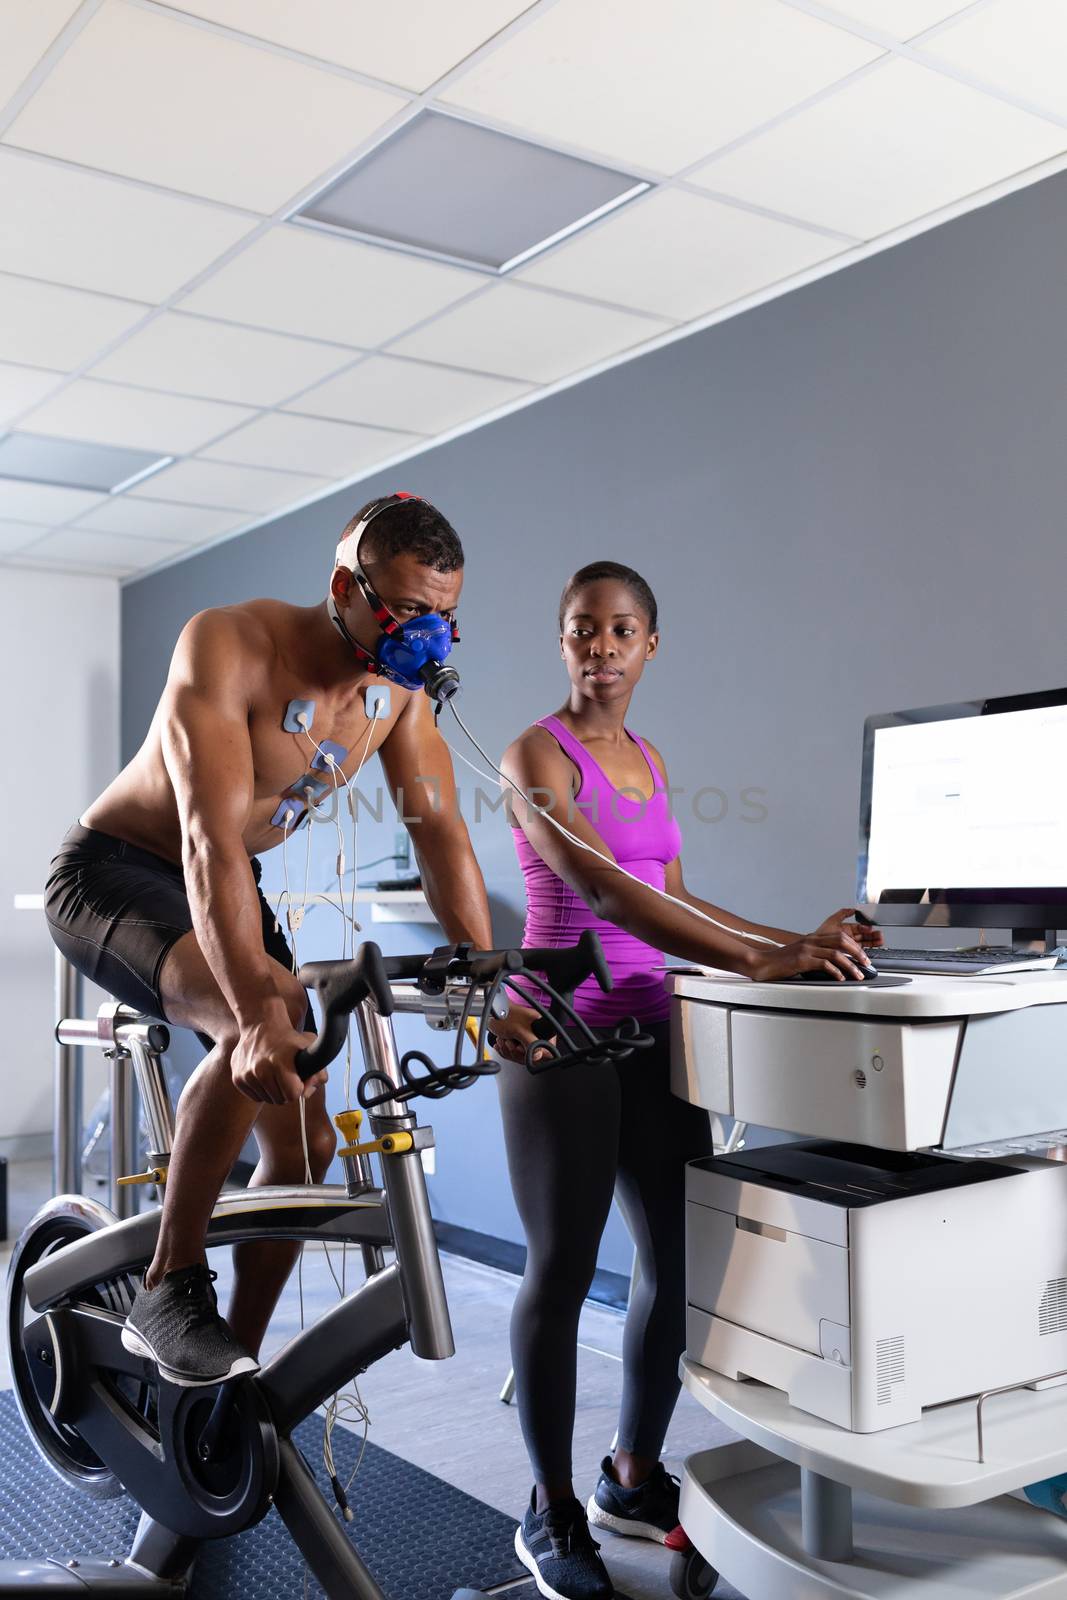 Side view of a naked African-American athletic man doing a fitness test using a mask connected to a monitor while riding an exercise bike and an African-American woman assisting him inside a room at a sports center. Bright modern gym with fit healthy people working out and training. Athlete testing themselves with cardiovascular fitness test on exercise bike